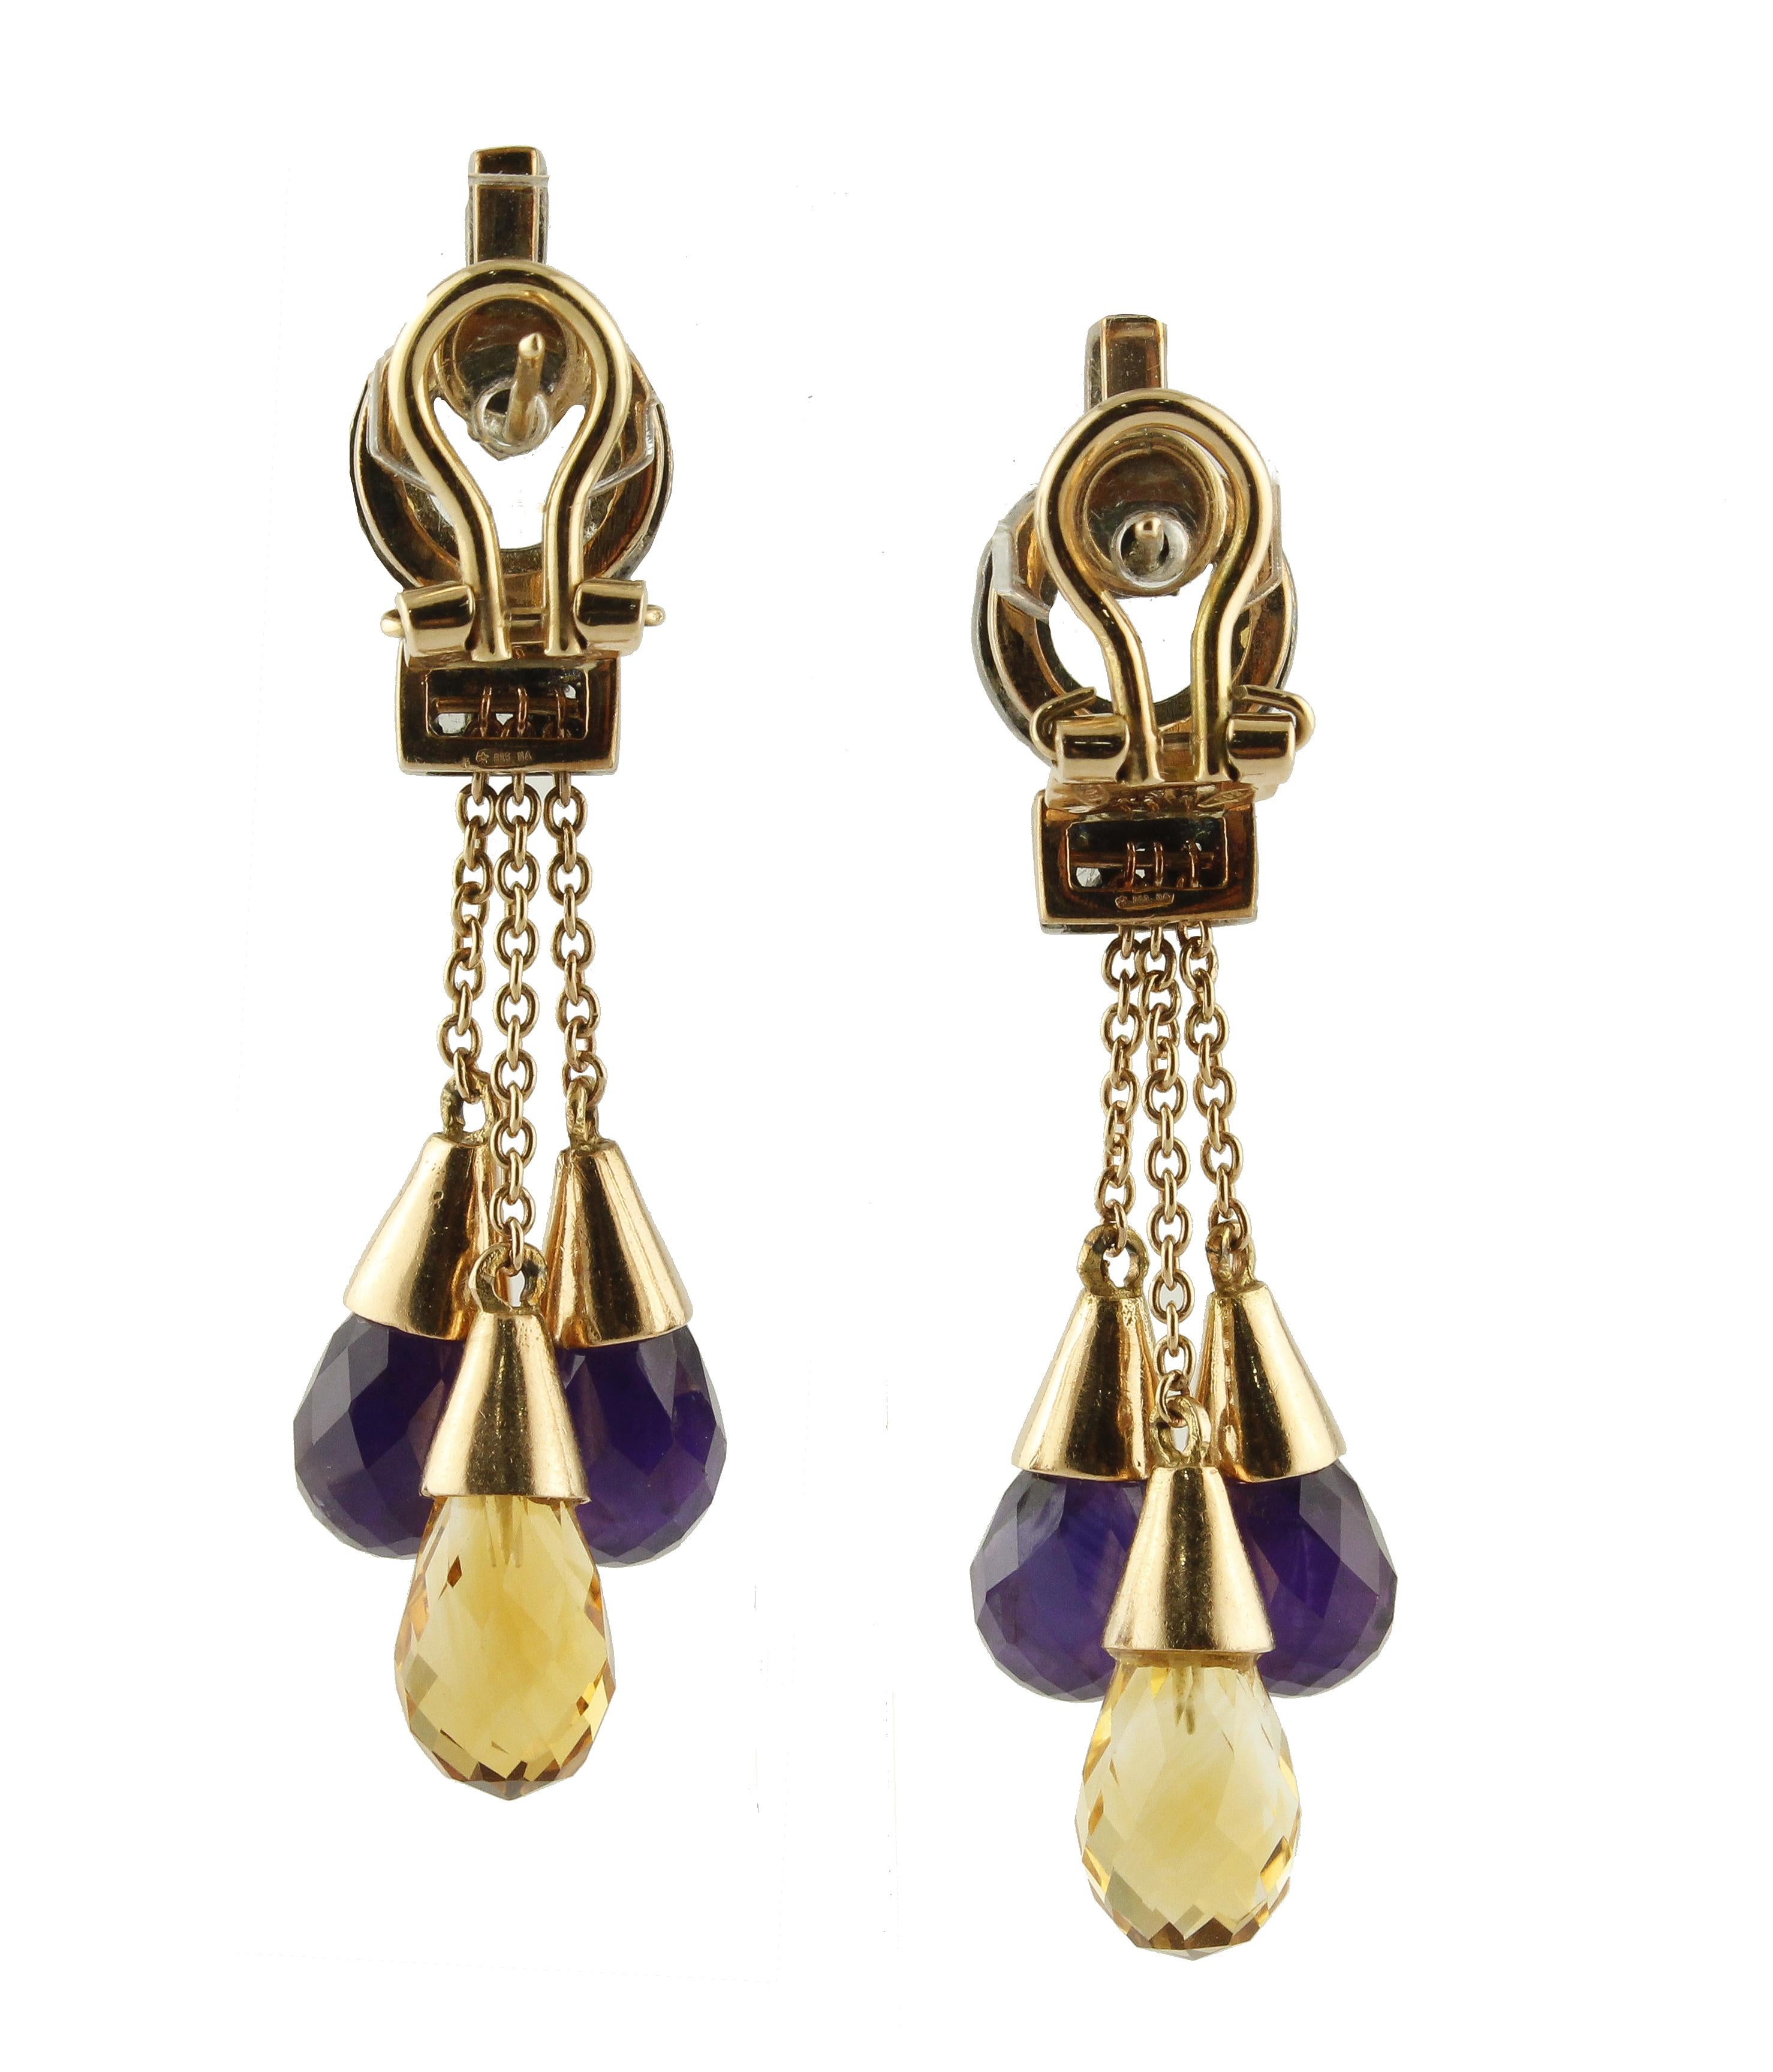 Fantastic chandelier earrings in 14K rose gold and silver structure mounted with diamonds yellow topaz and amethyst and yellow topaz drops
Diamonds 0.15 ct 
Amethyst and Yellow Topaz 25.13 ct 
Total Weight 17.80
R.F +gora
Length 5.7 cm 

For any